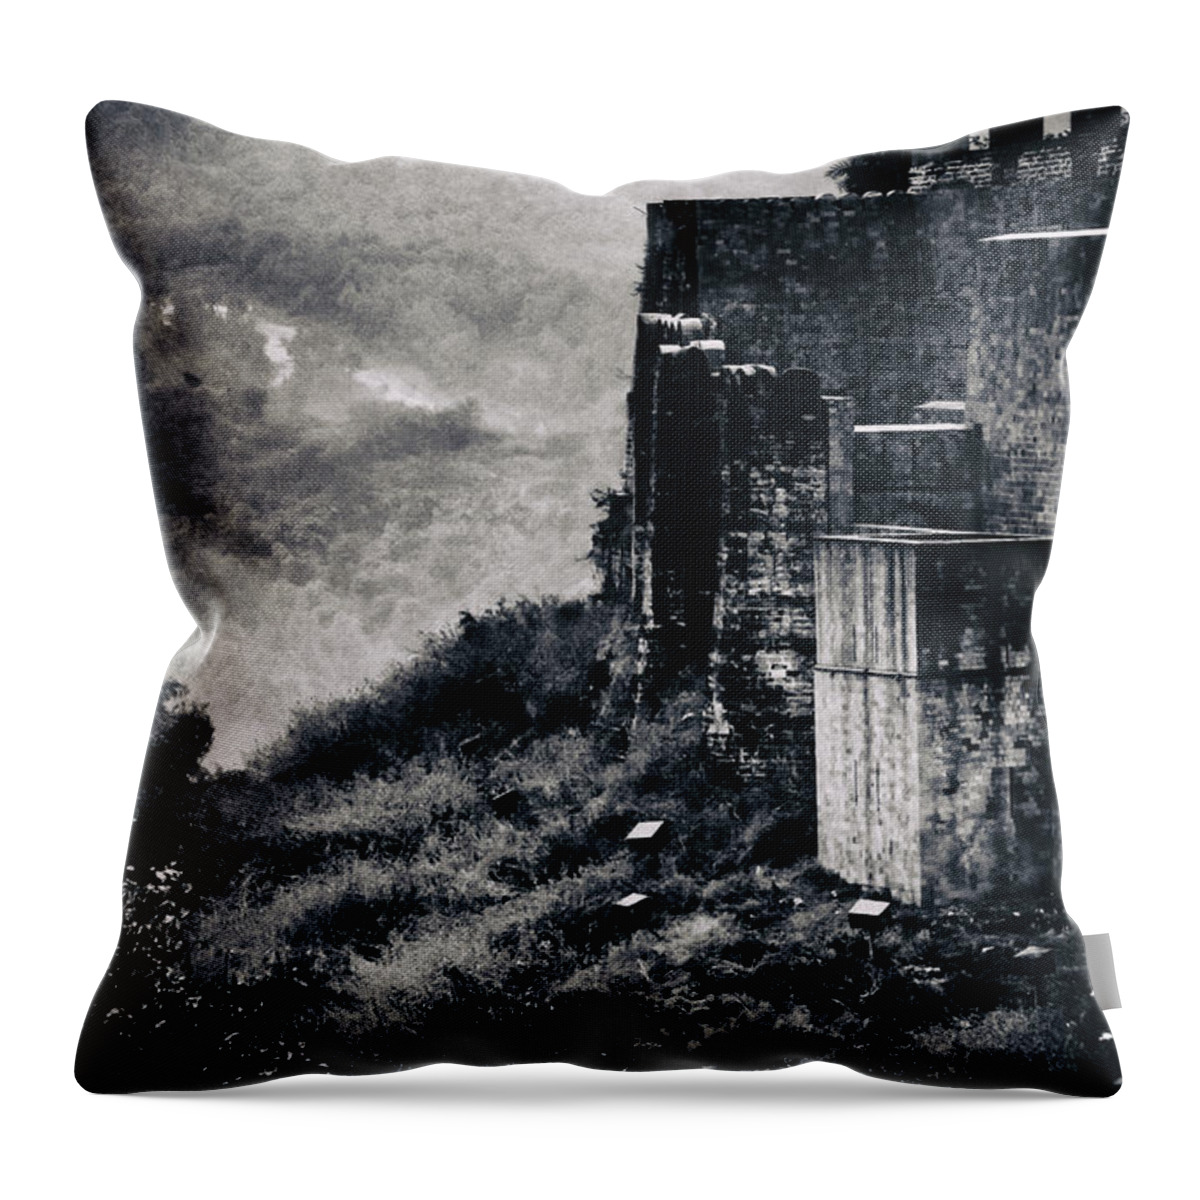 India Throw Pillow featuring the photograph The Walls by Rajiv Chopra